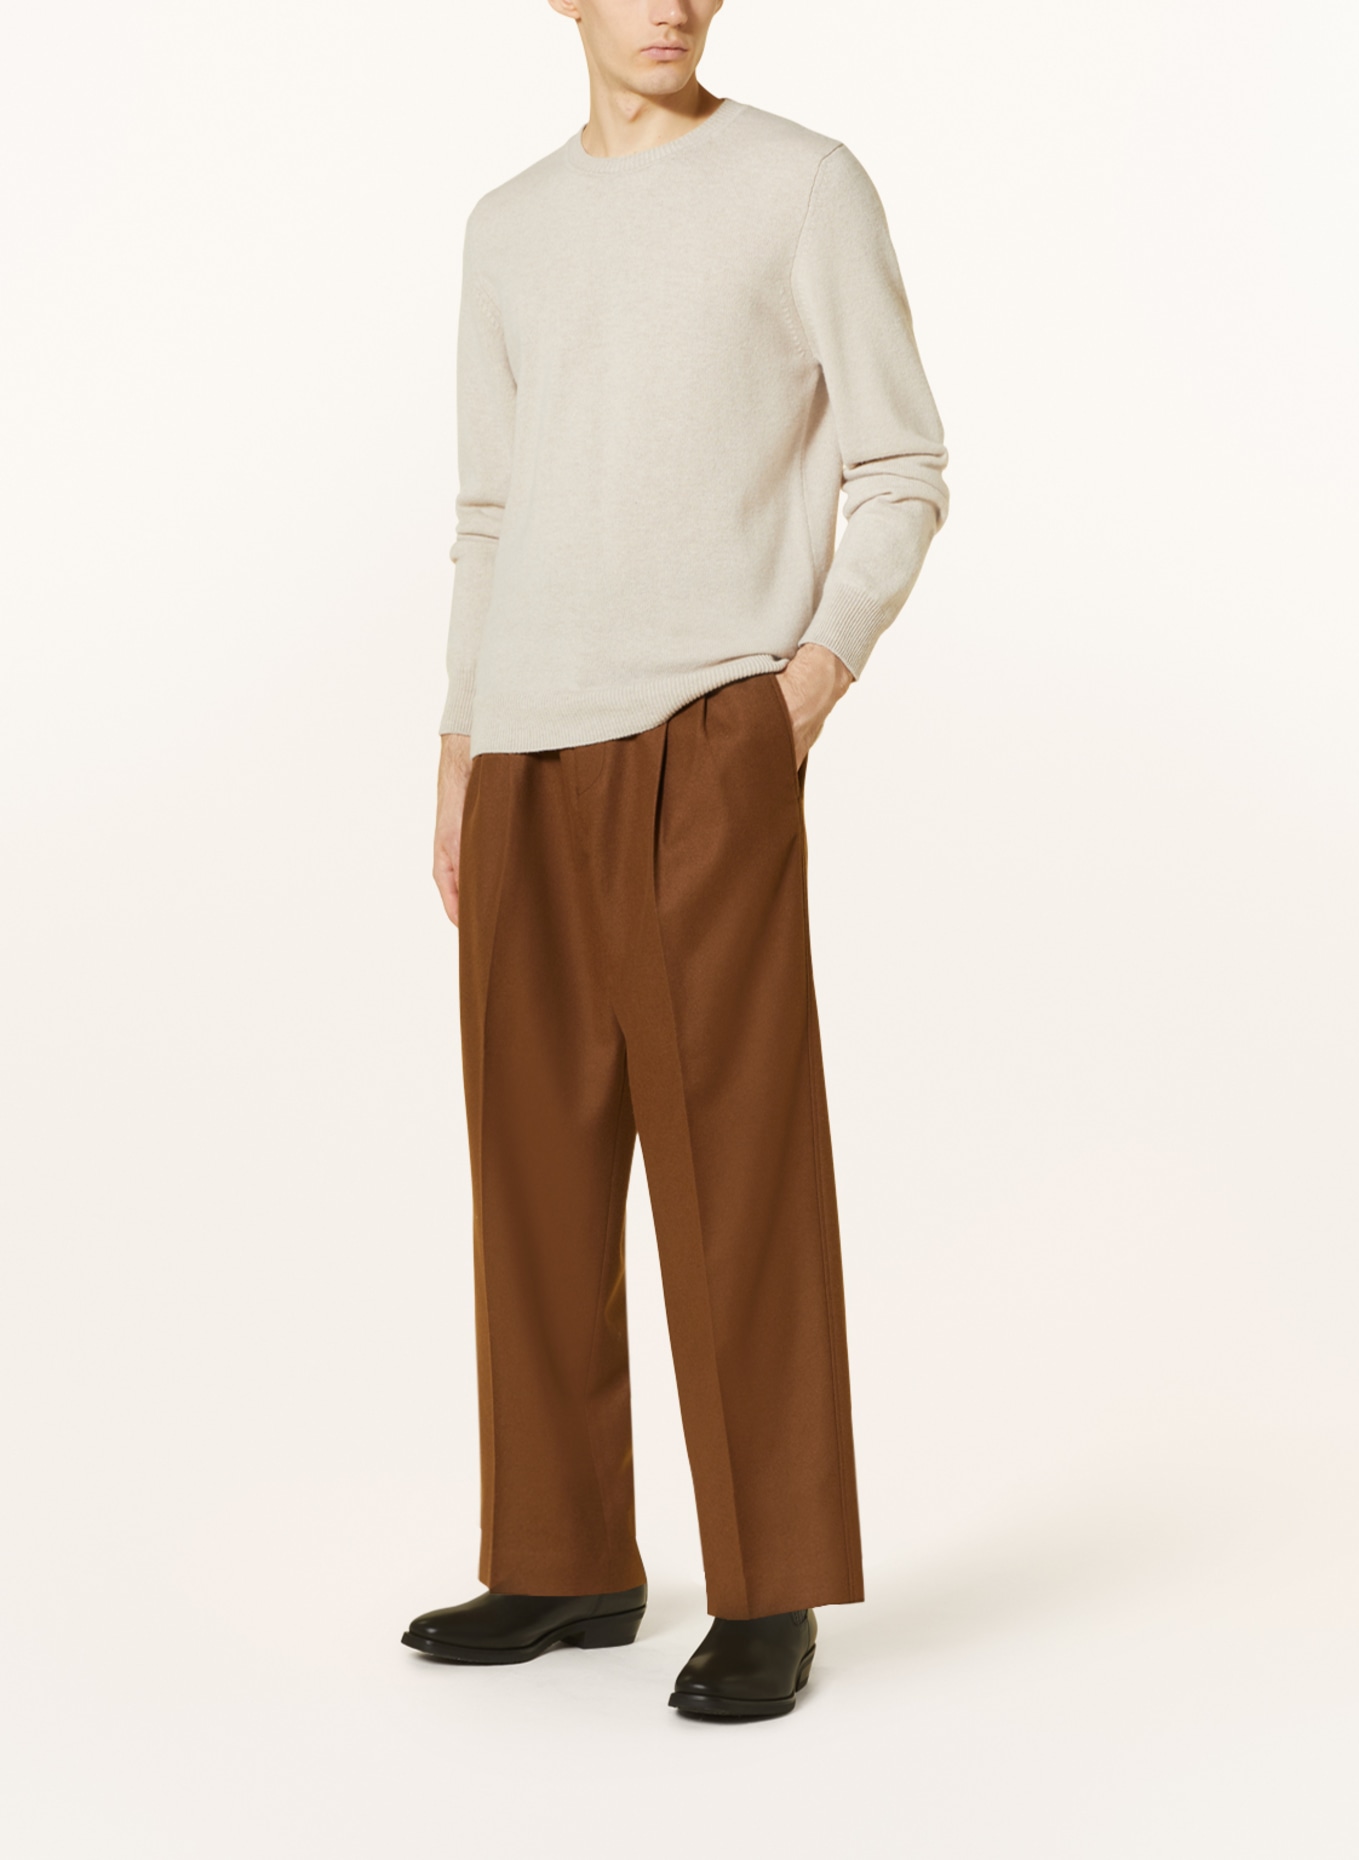 NORSE PROJECTS Pullover SIGFRED, Farbe: CREME (Bild 2)